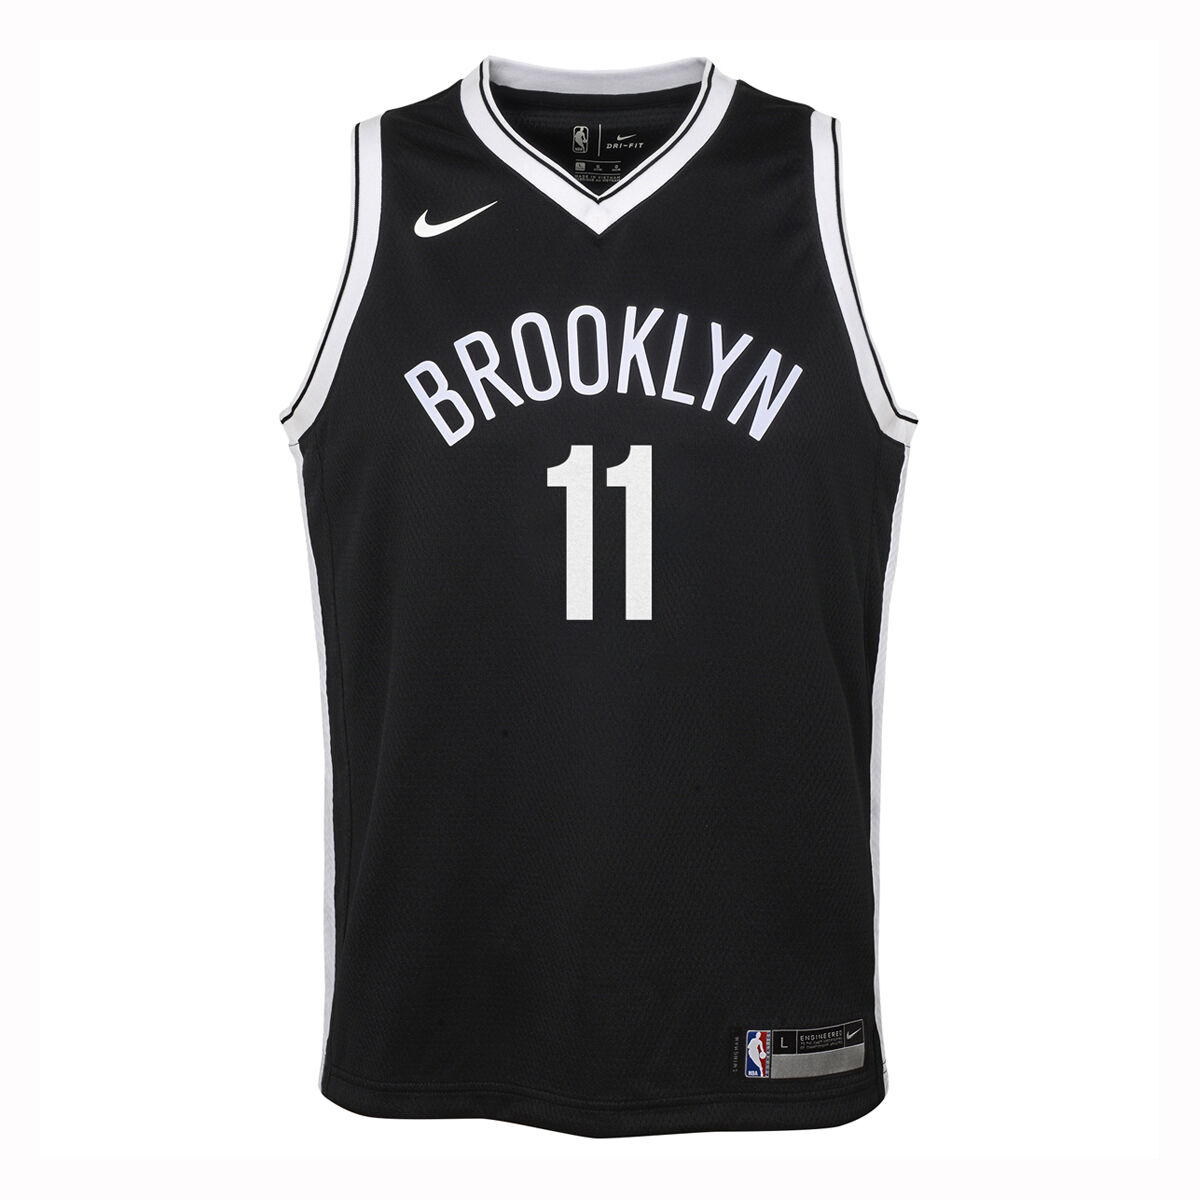 what jersey number is kyrie irving